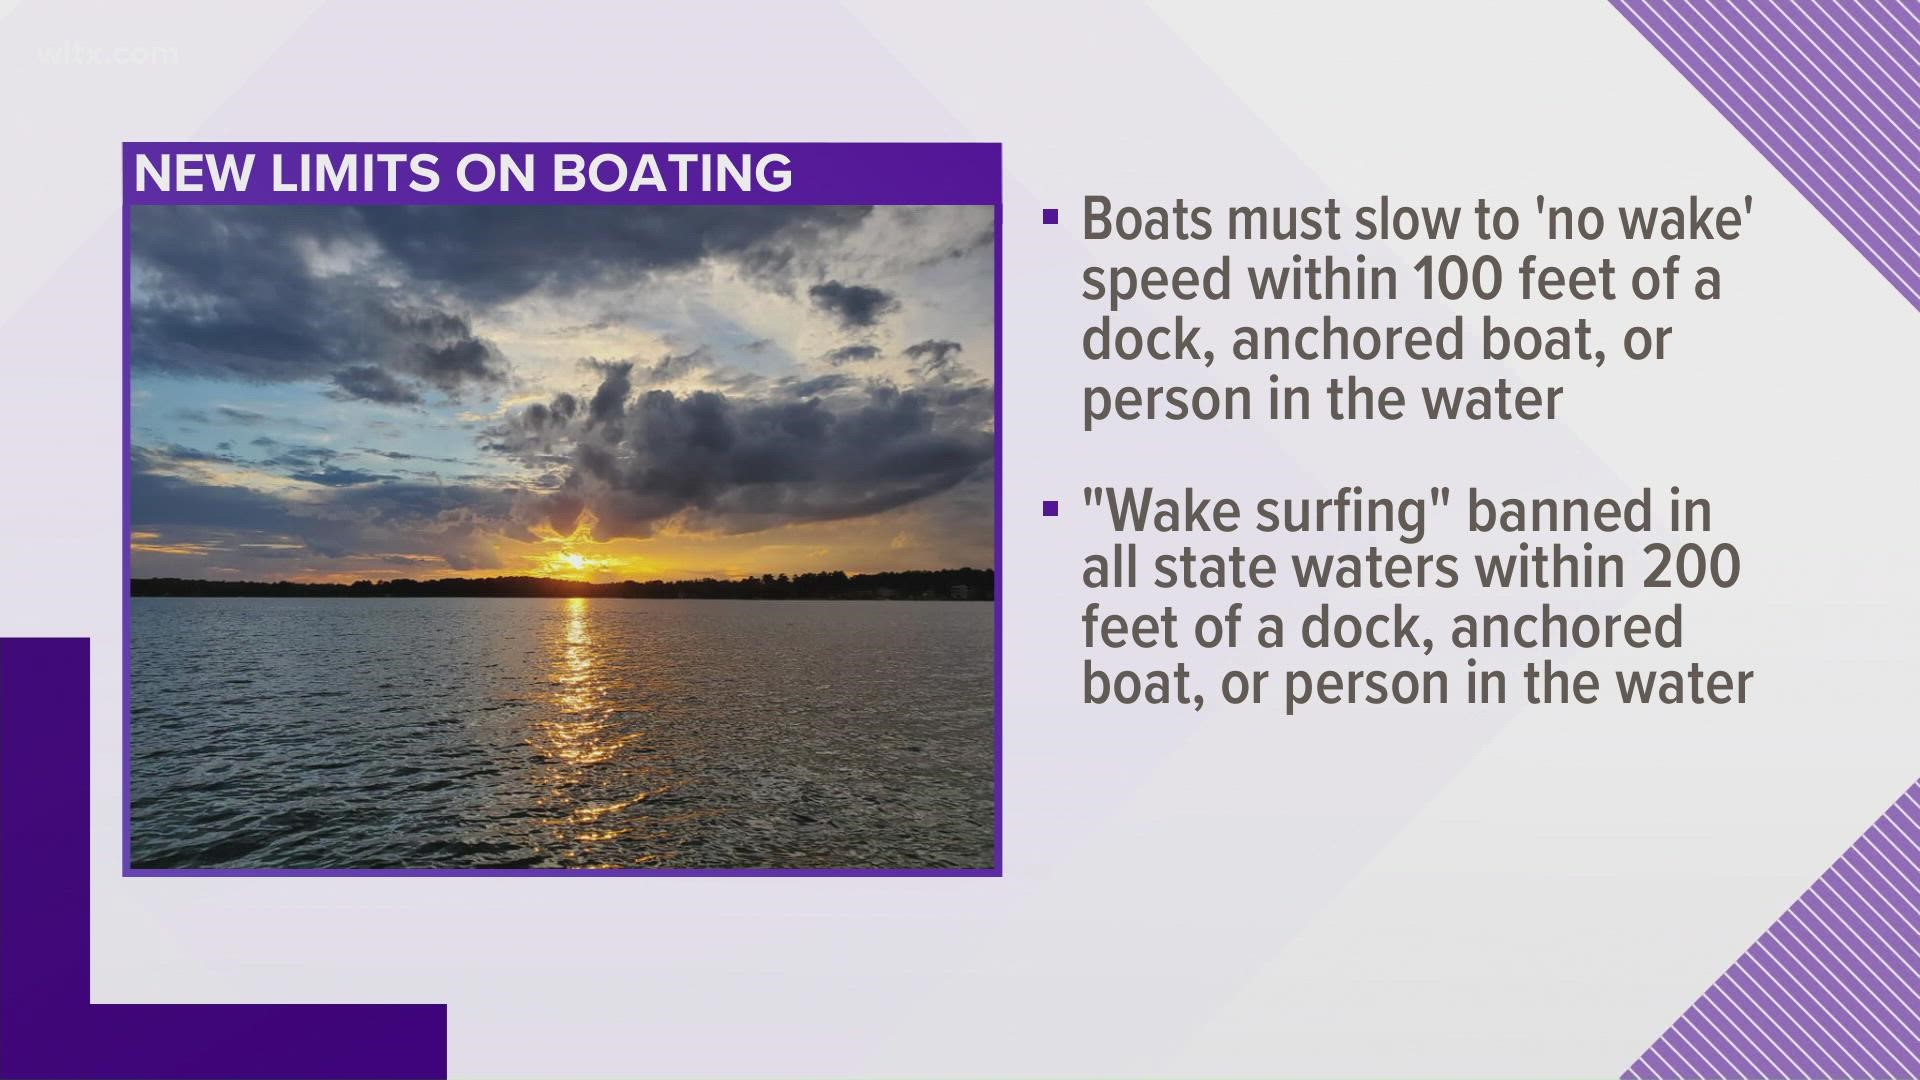 The new law increases the distance limit for boating to 100 feet and wake surfing to 200 feet.